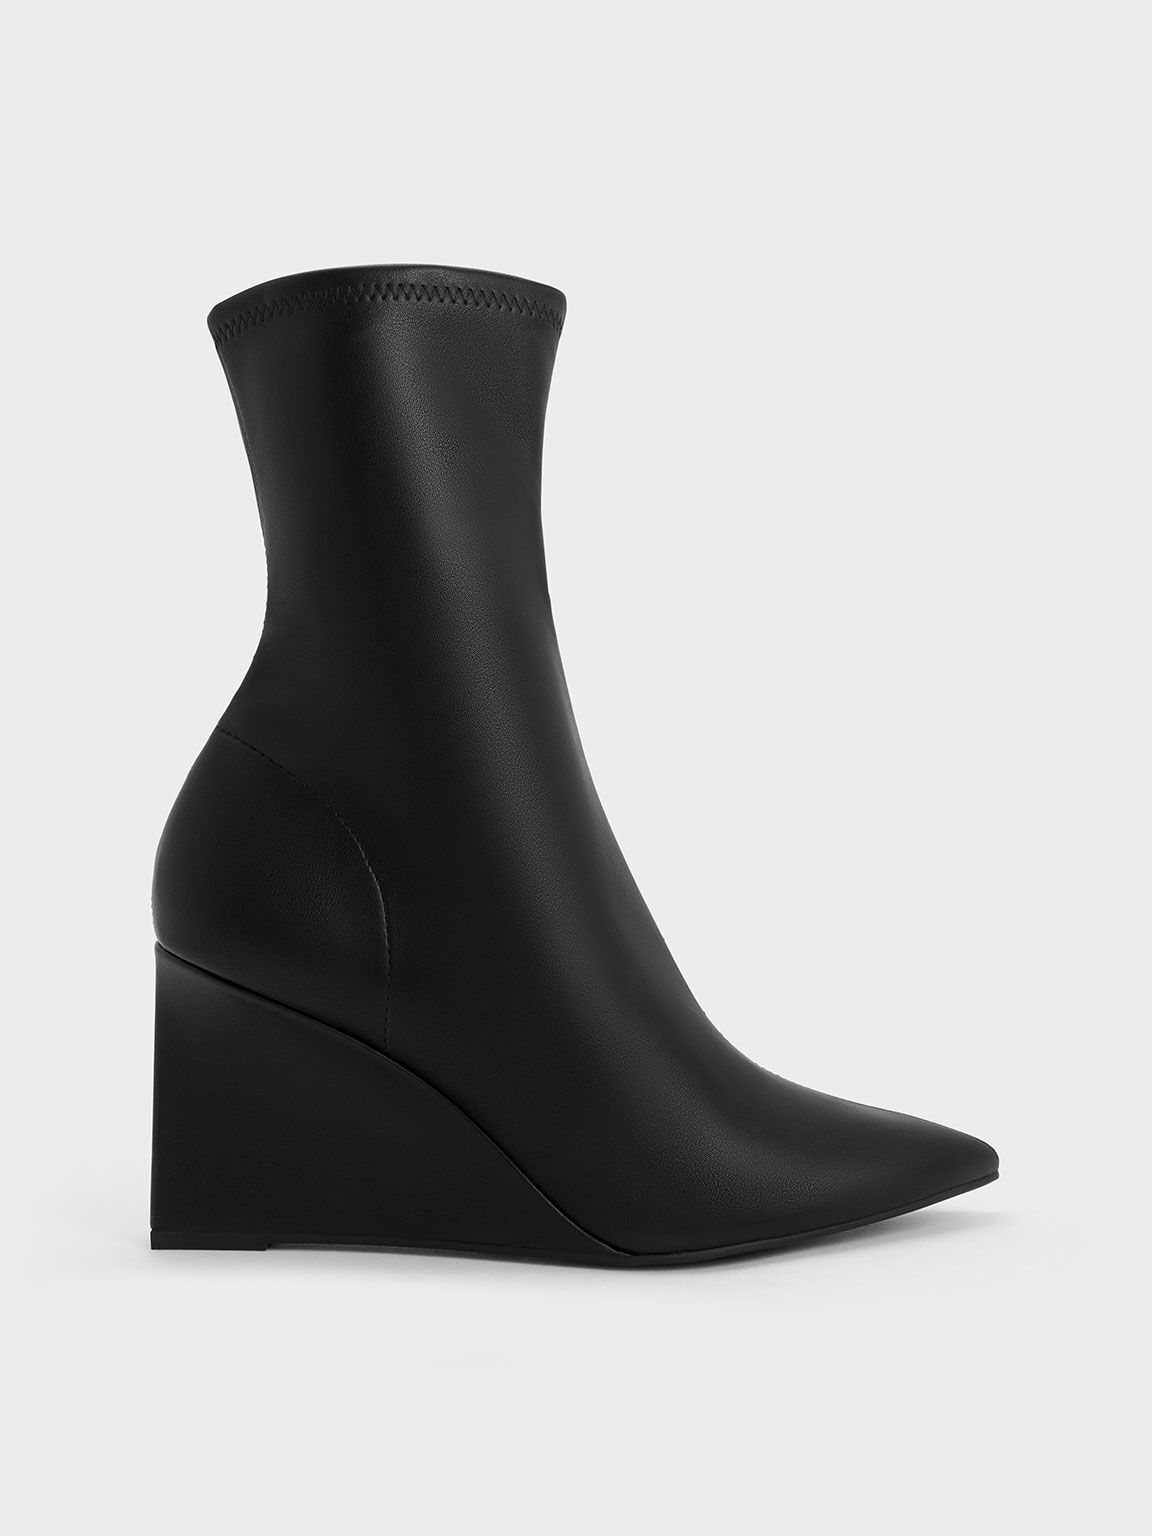 Black Pointed-Toe Wedge Ankle Boots - CHARLES & KEITH QA